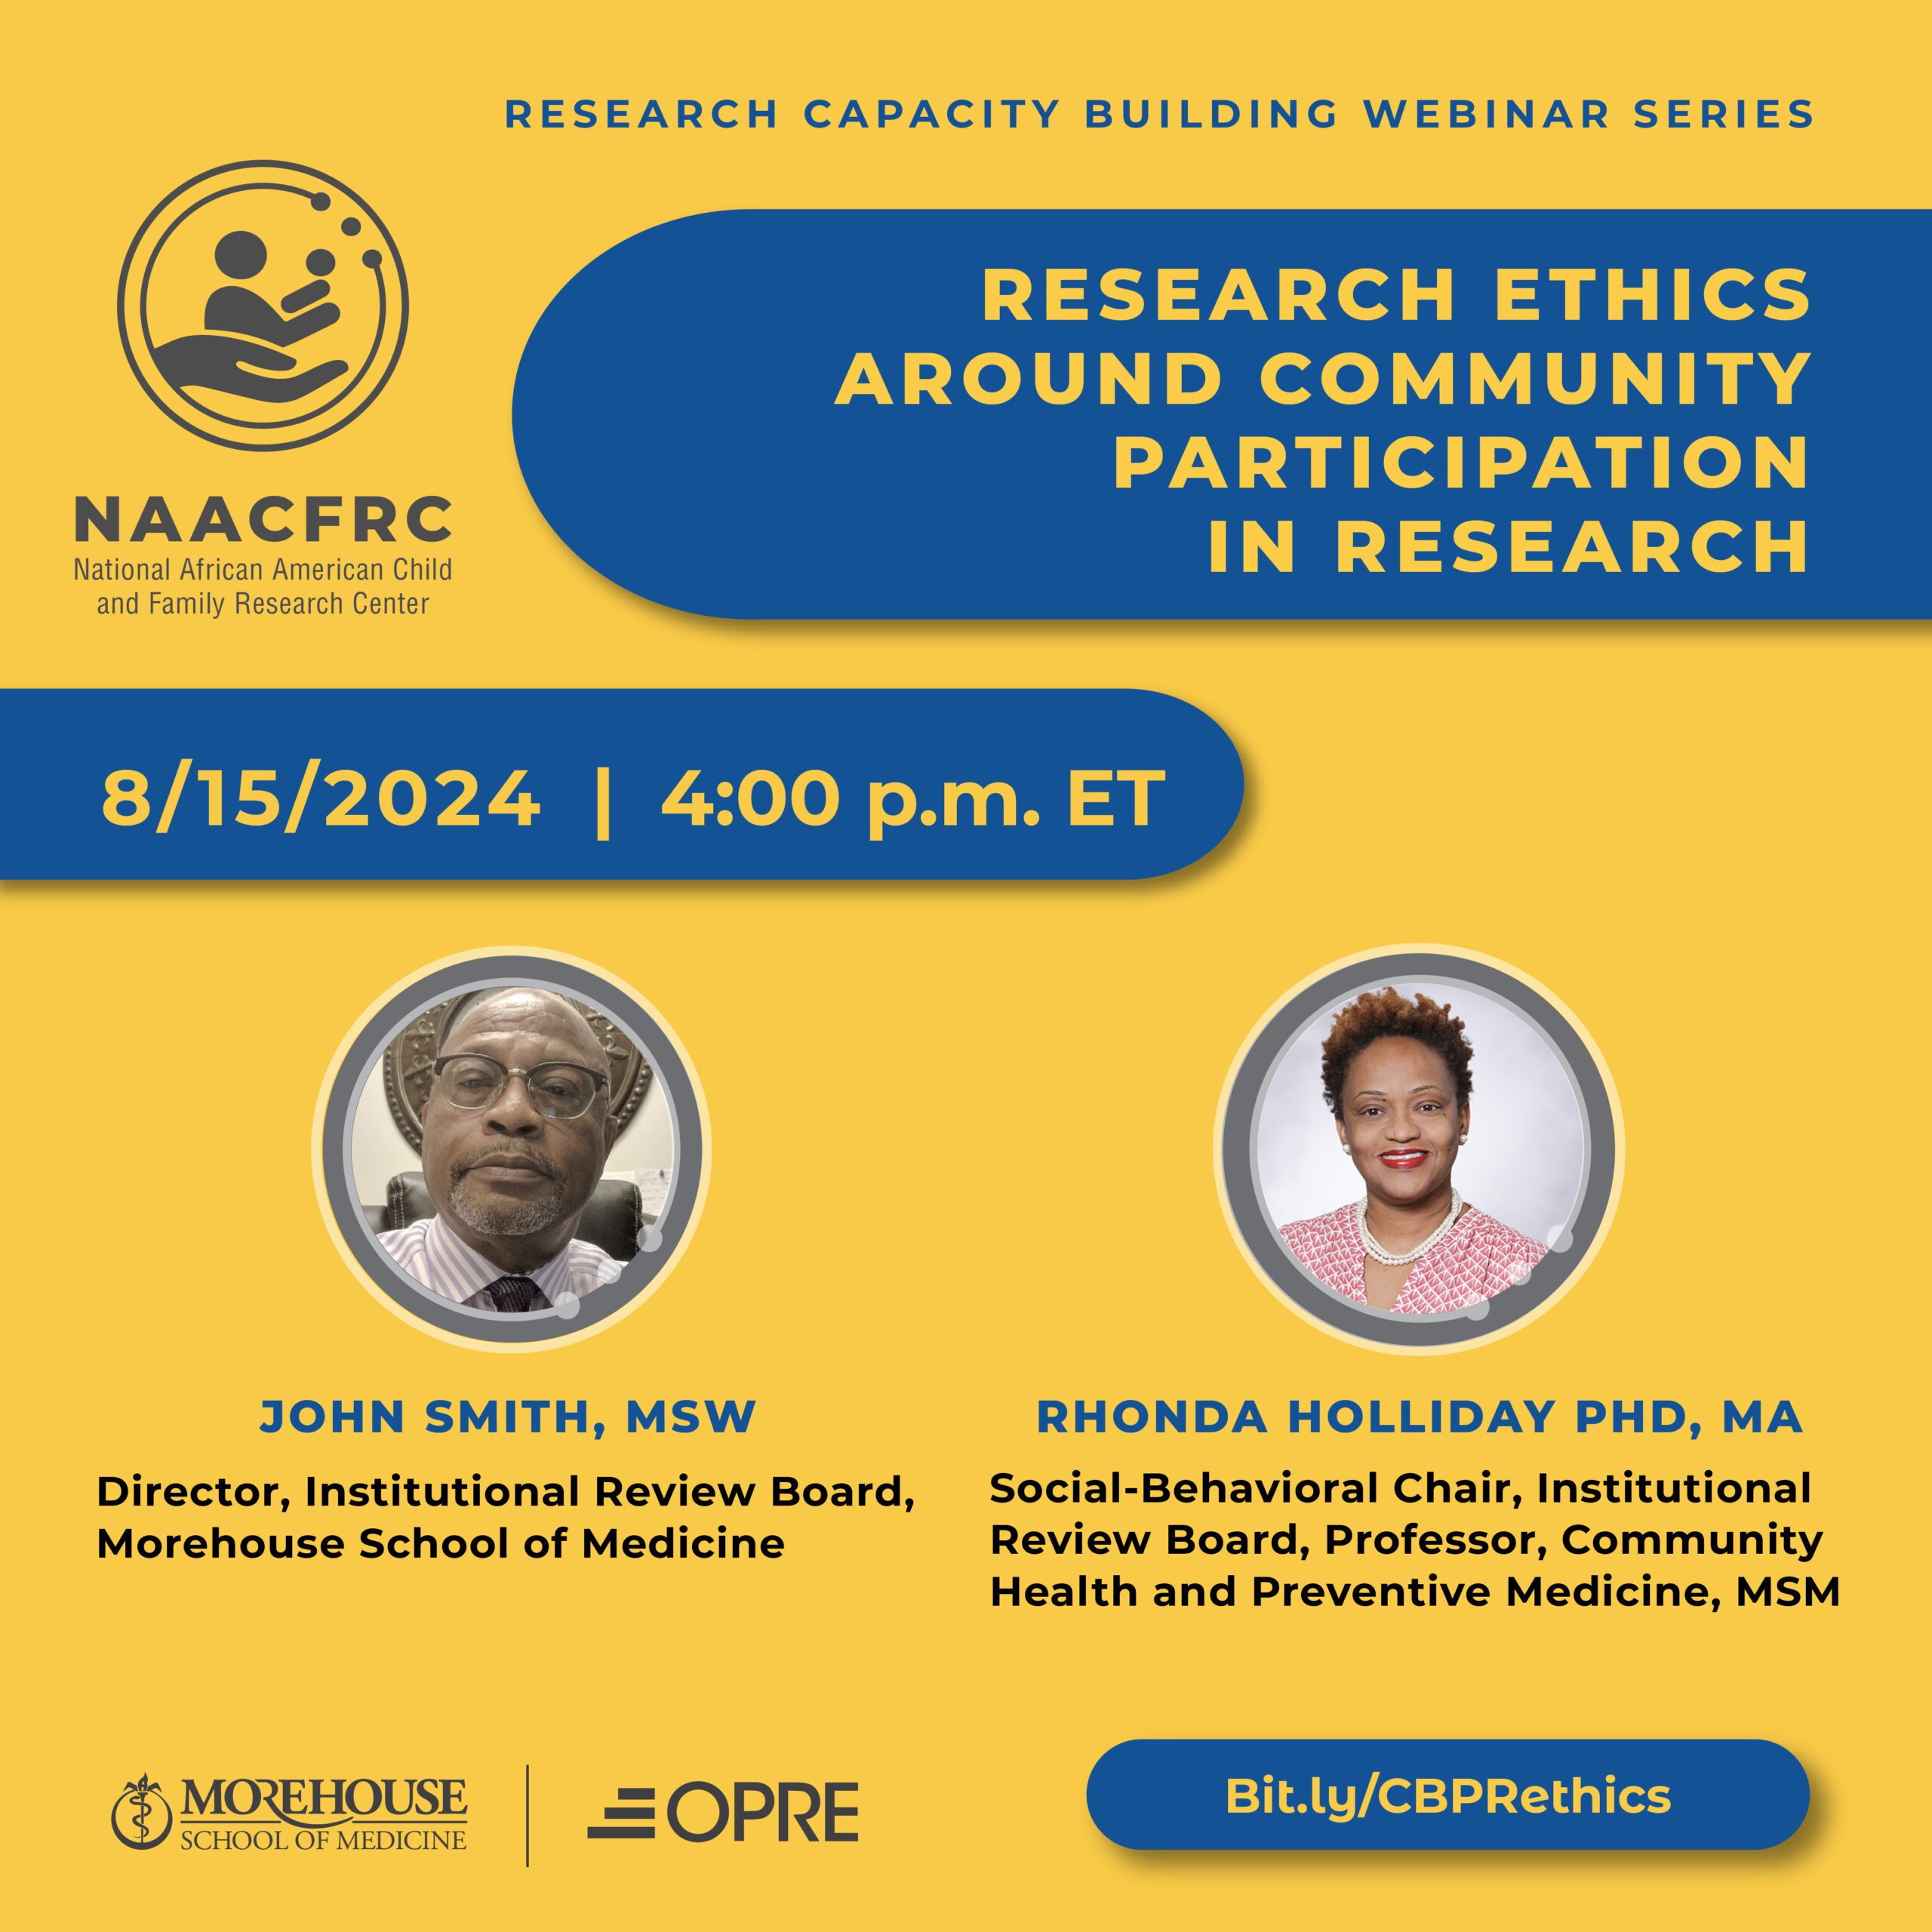 Flyer for the NAACFRC (National African American Child and Family Research Center) Research Capacity Building Webinar Series titled 'Research Ethics Around Community Participation in Research.' The event is scheduled for August 15, 2024, at 4:00 p.m. ET. The flyer features two speakers: John Smith, MSW, Director, Institutional Review Board, Morehouse School of Medicine, and Rhonda Holliday, PhD, MA, Social-Behavioral Chair, Institutional Review Board, Professor, Community Health and Preventive Medicine, Morehouse School of Medicine. The flyer includes logos of Morehouse School of Medicine and OPRE. A link to register is provided: Bit.ly/CBPrethics.